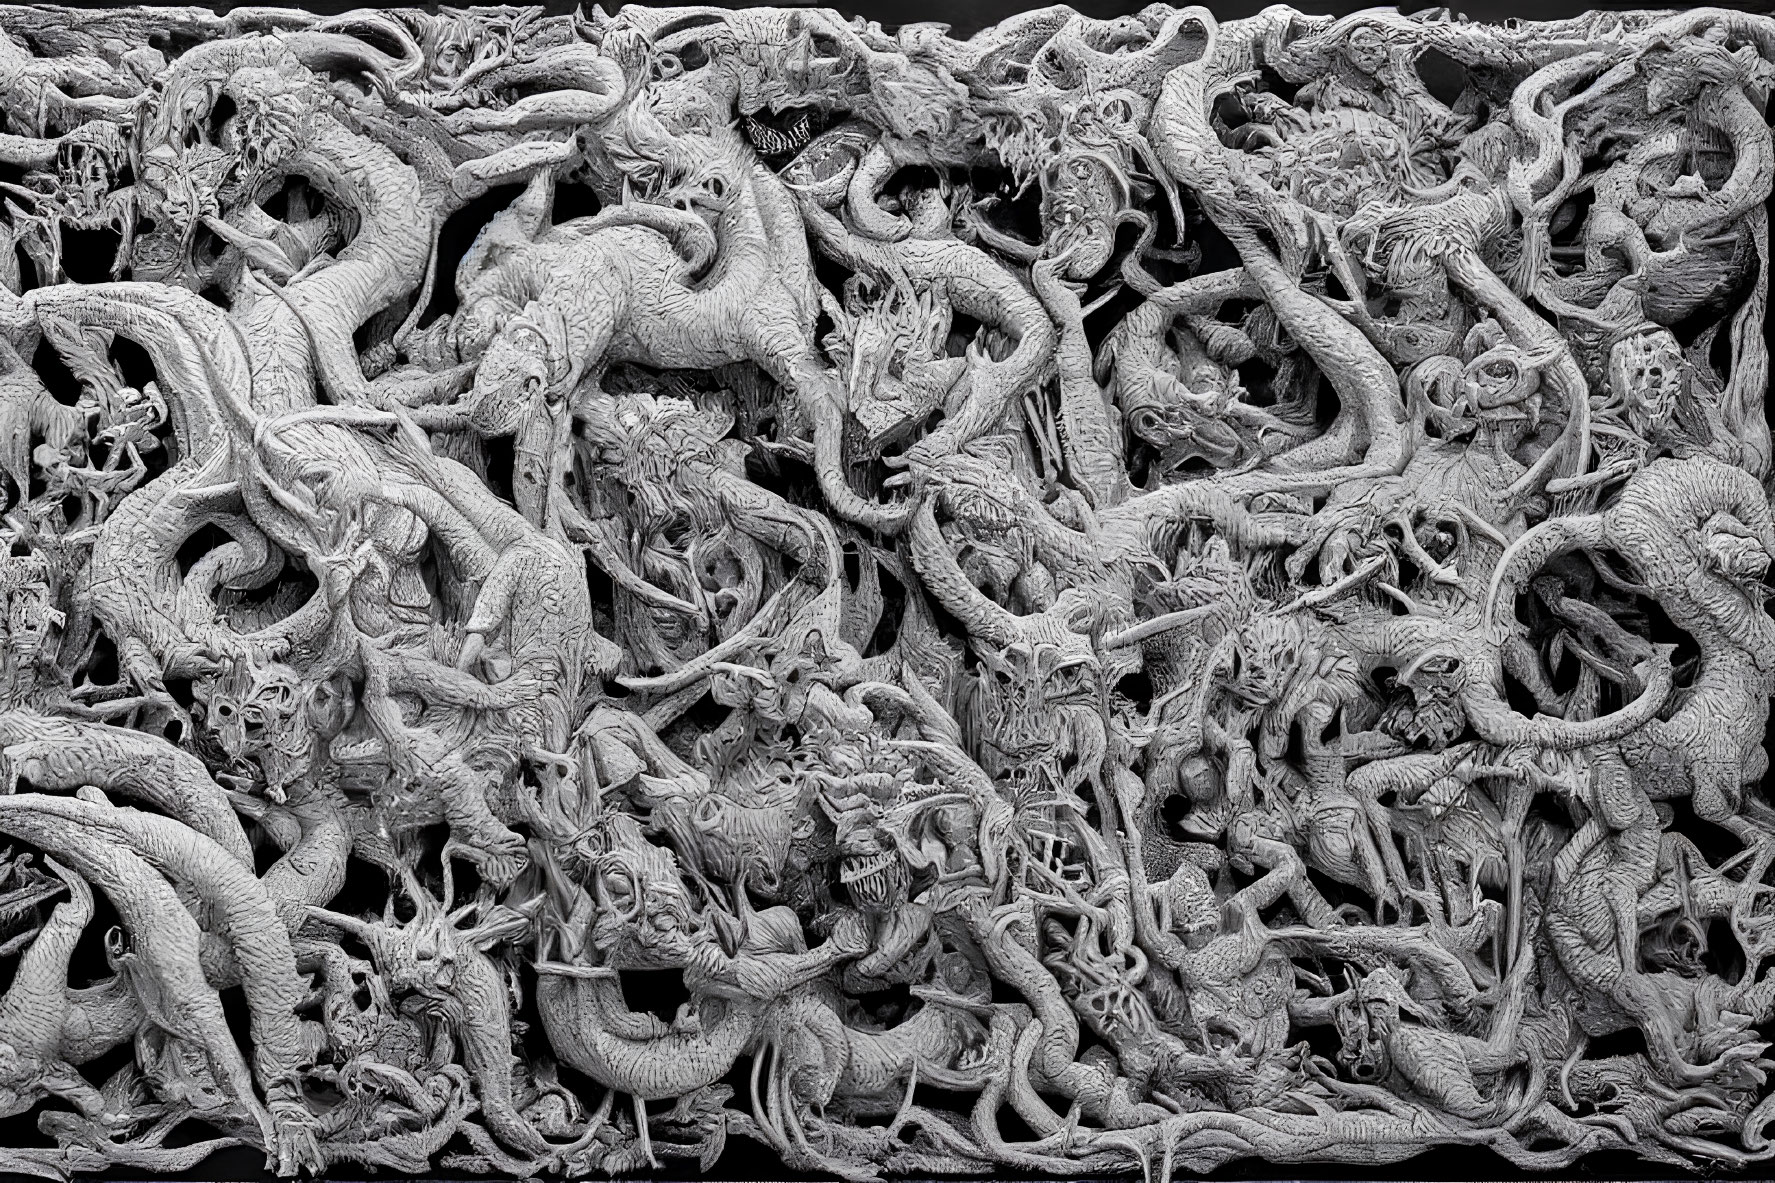 Detailed Monochromatic Relief Carving of Dragons